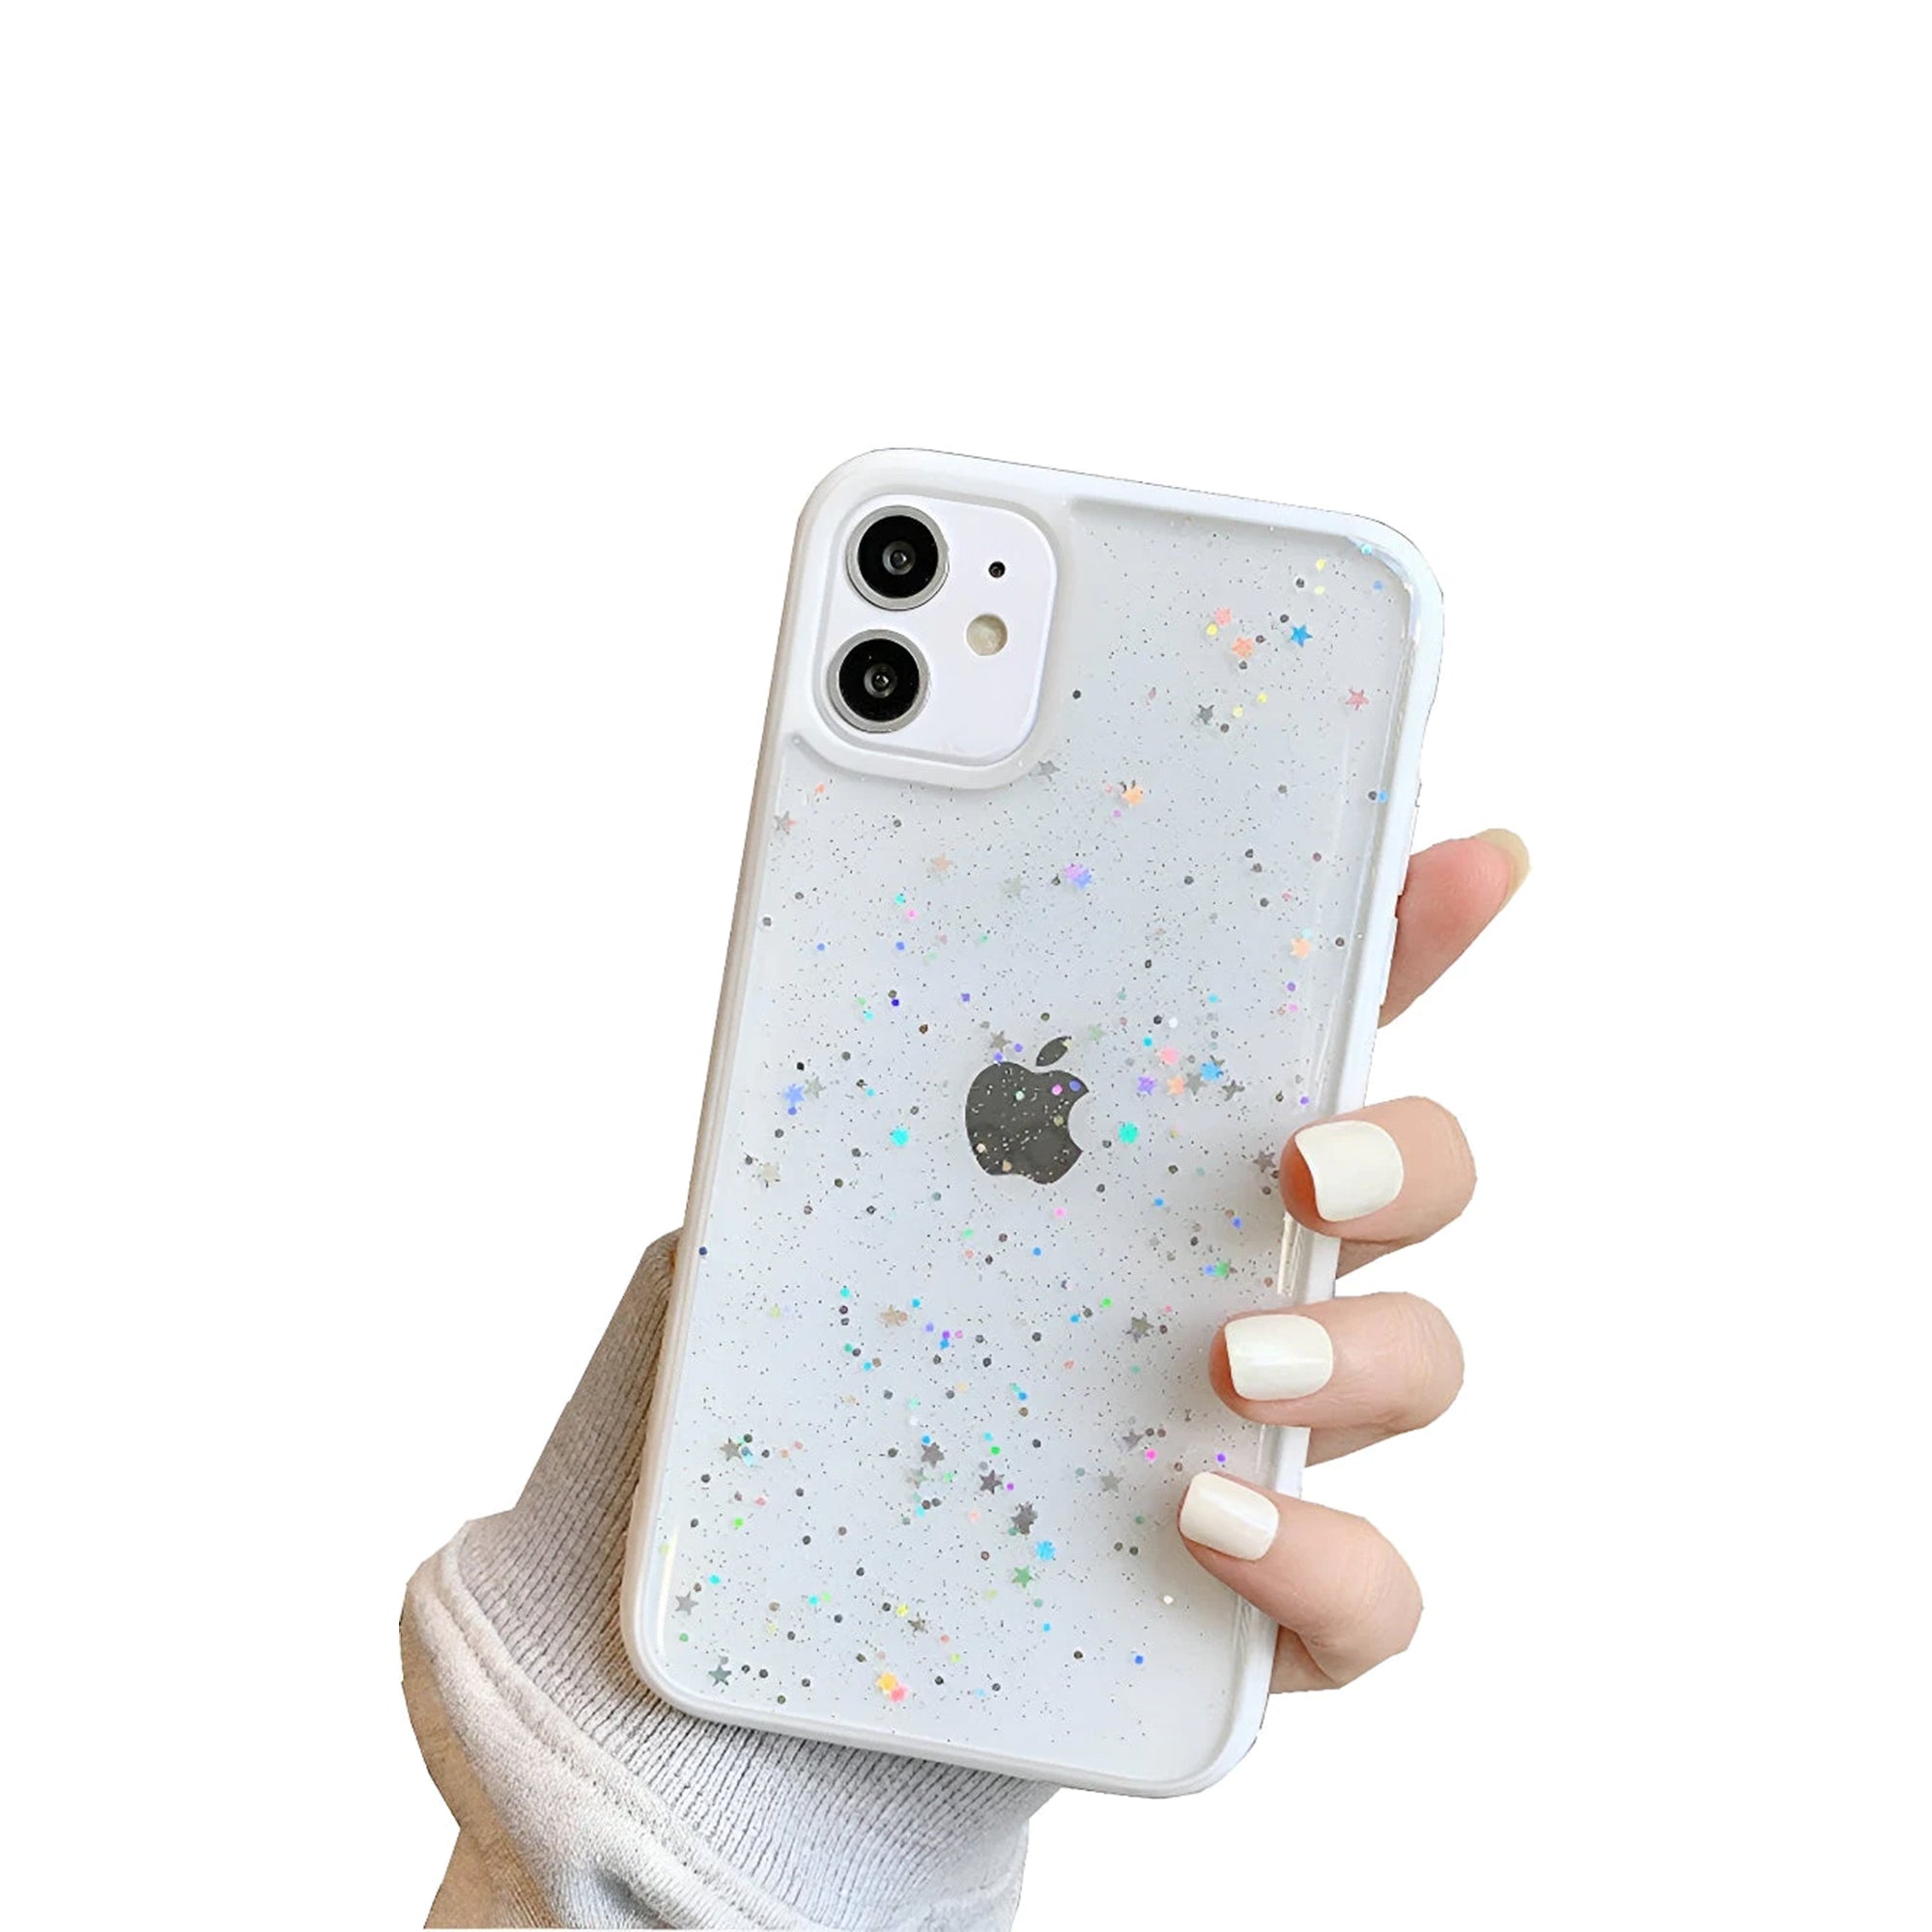 Everlab Fashion Bling Glitter Case Slim Cover Shockproof For iPhone